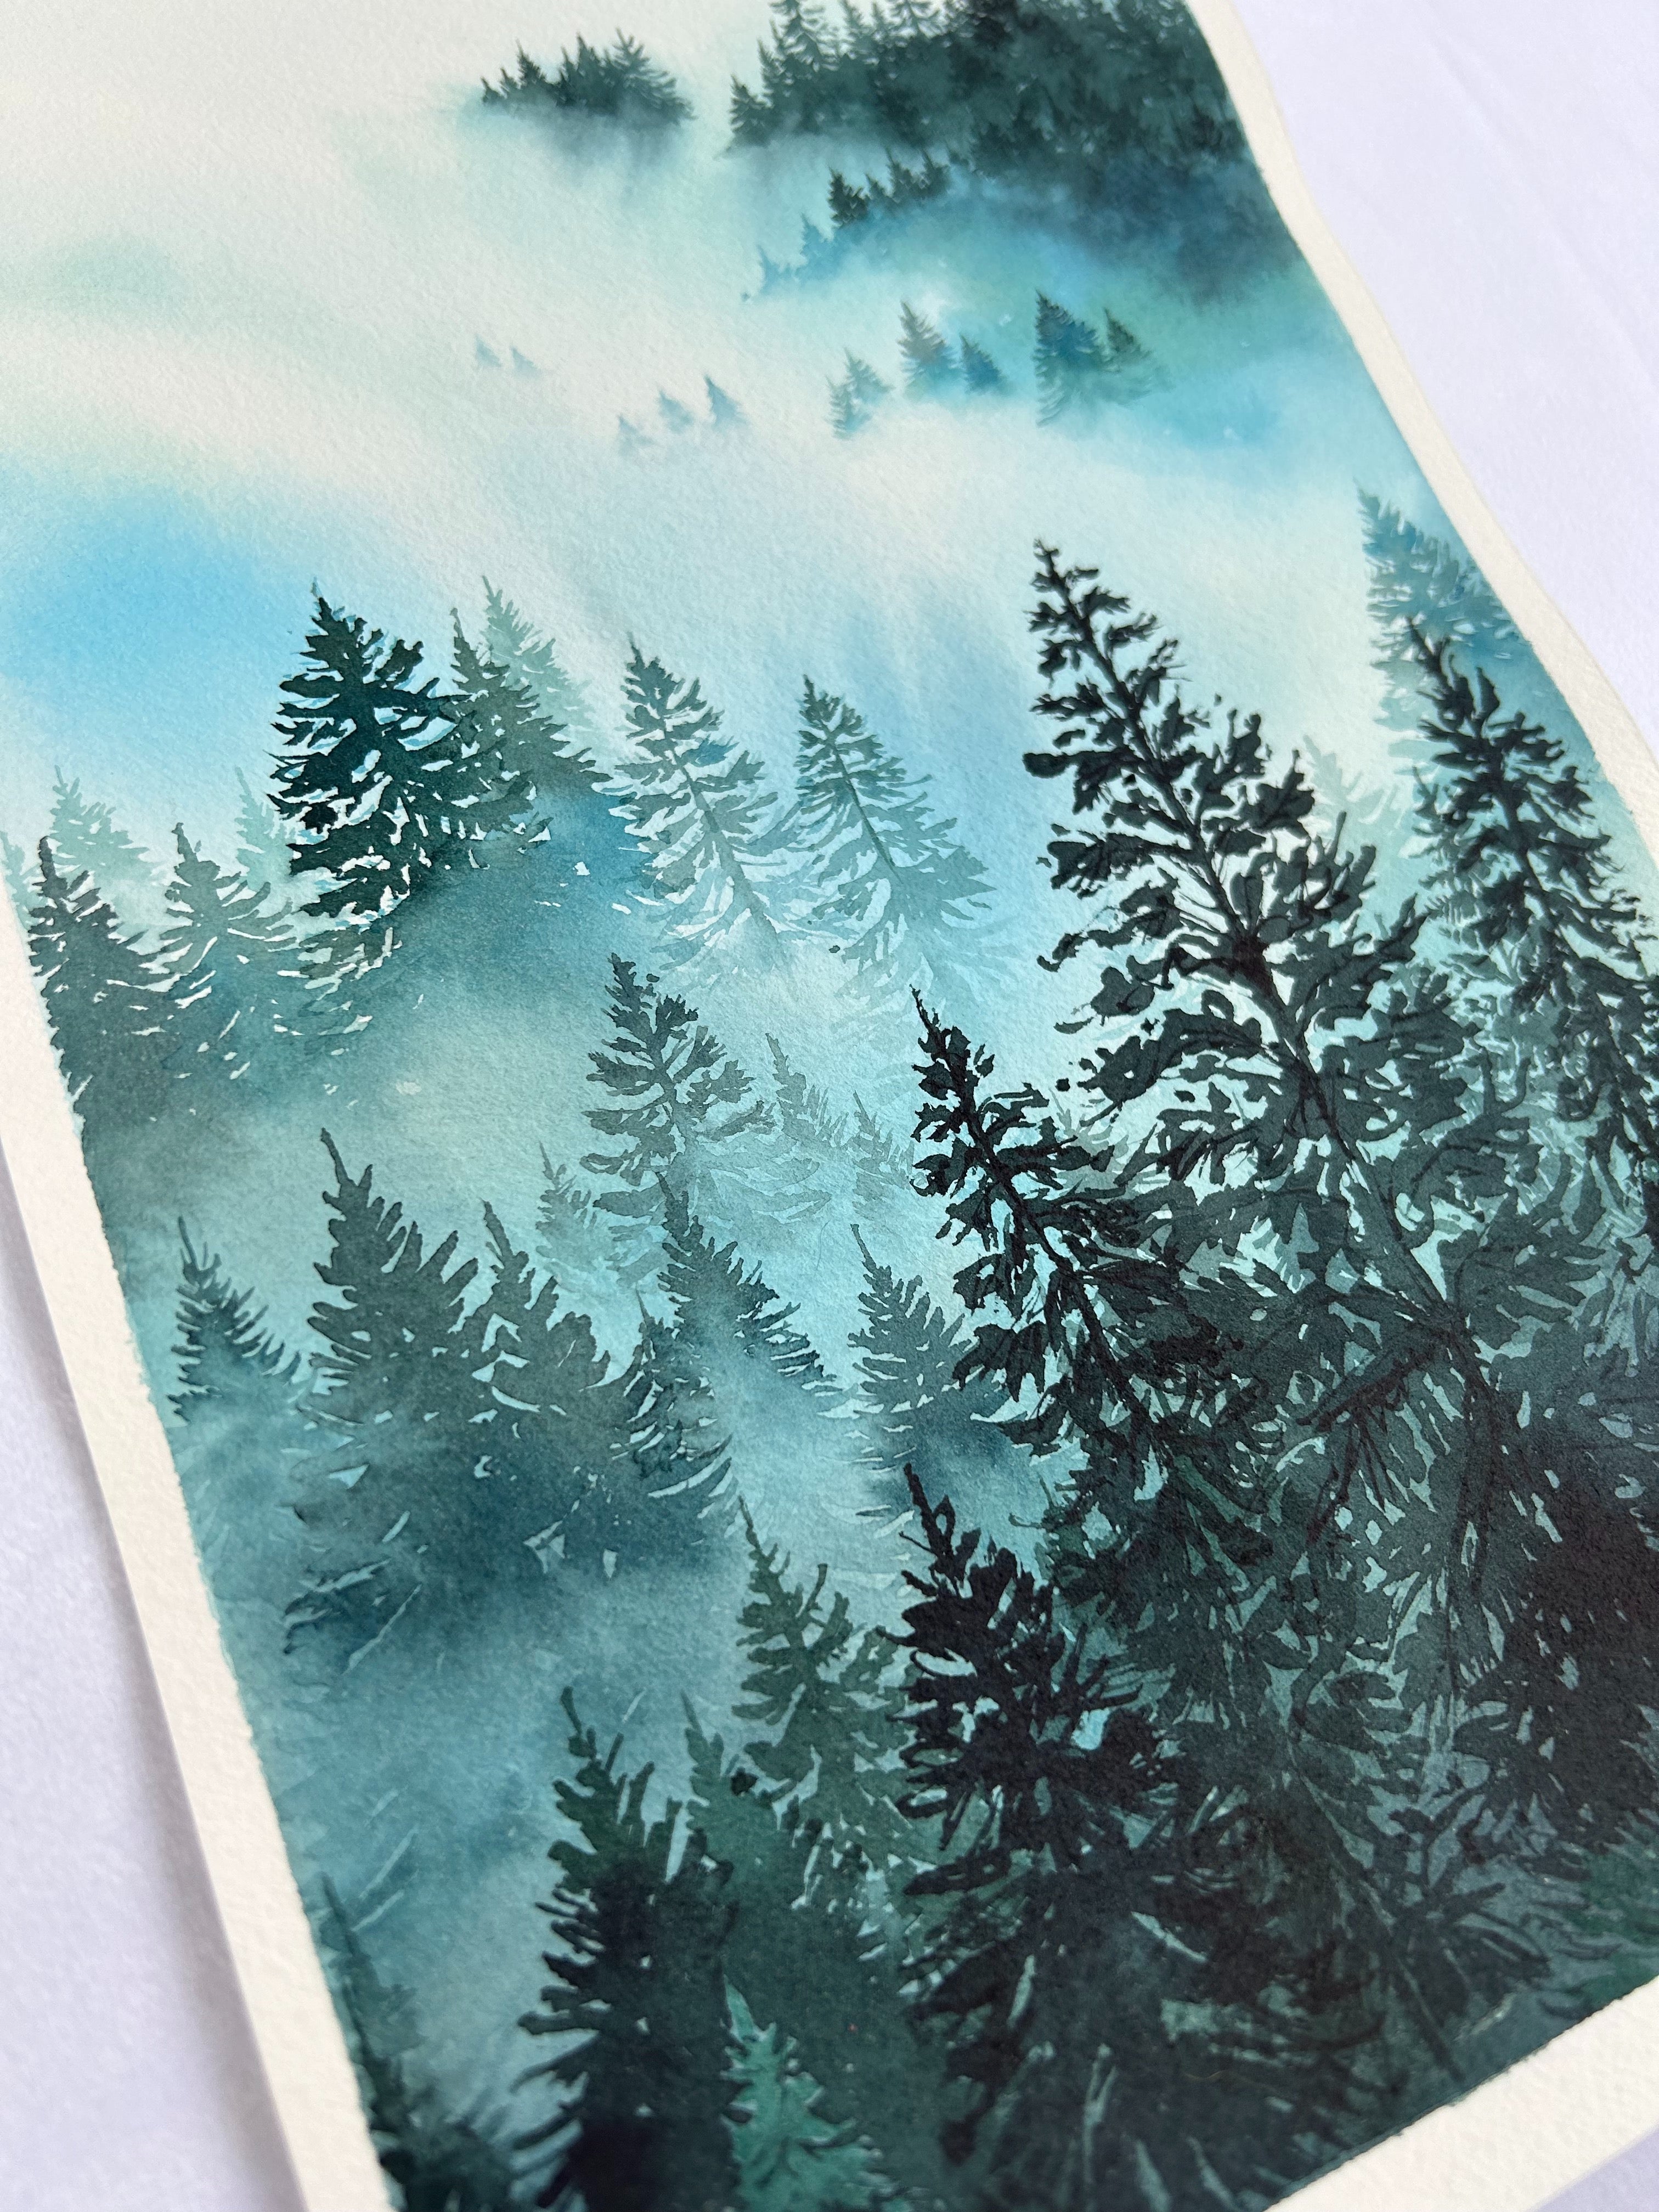 Enchanted Forest - Original Watercolor Painting